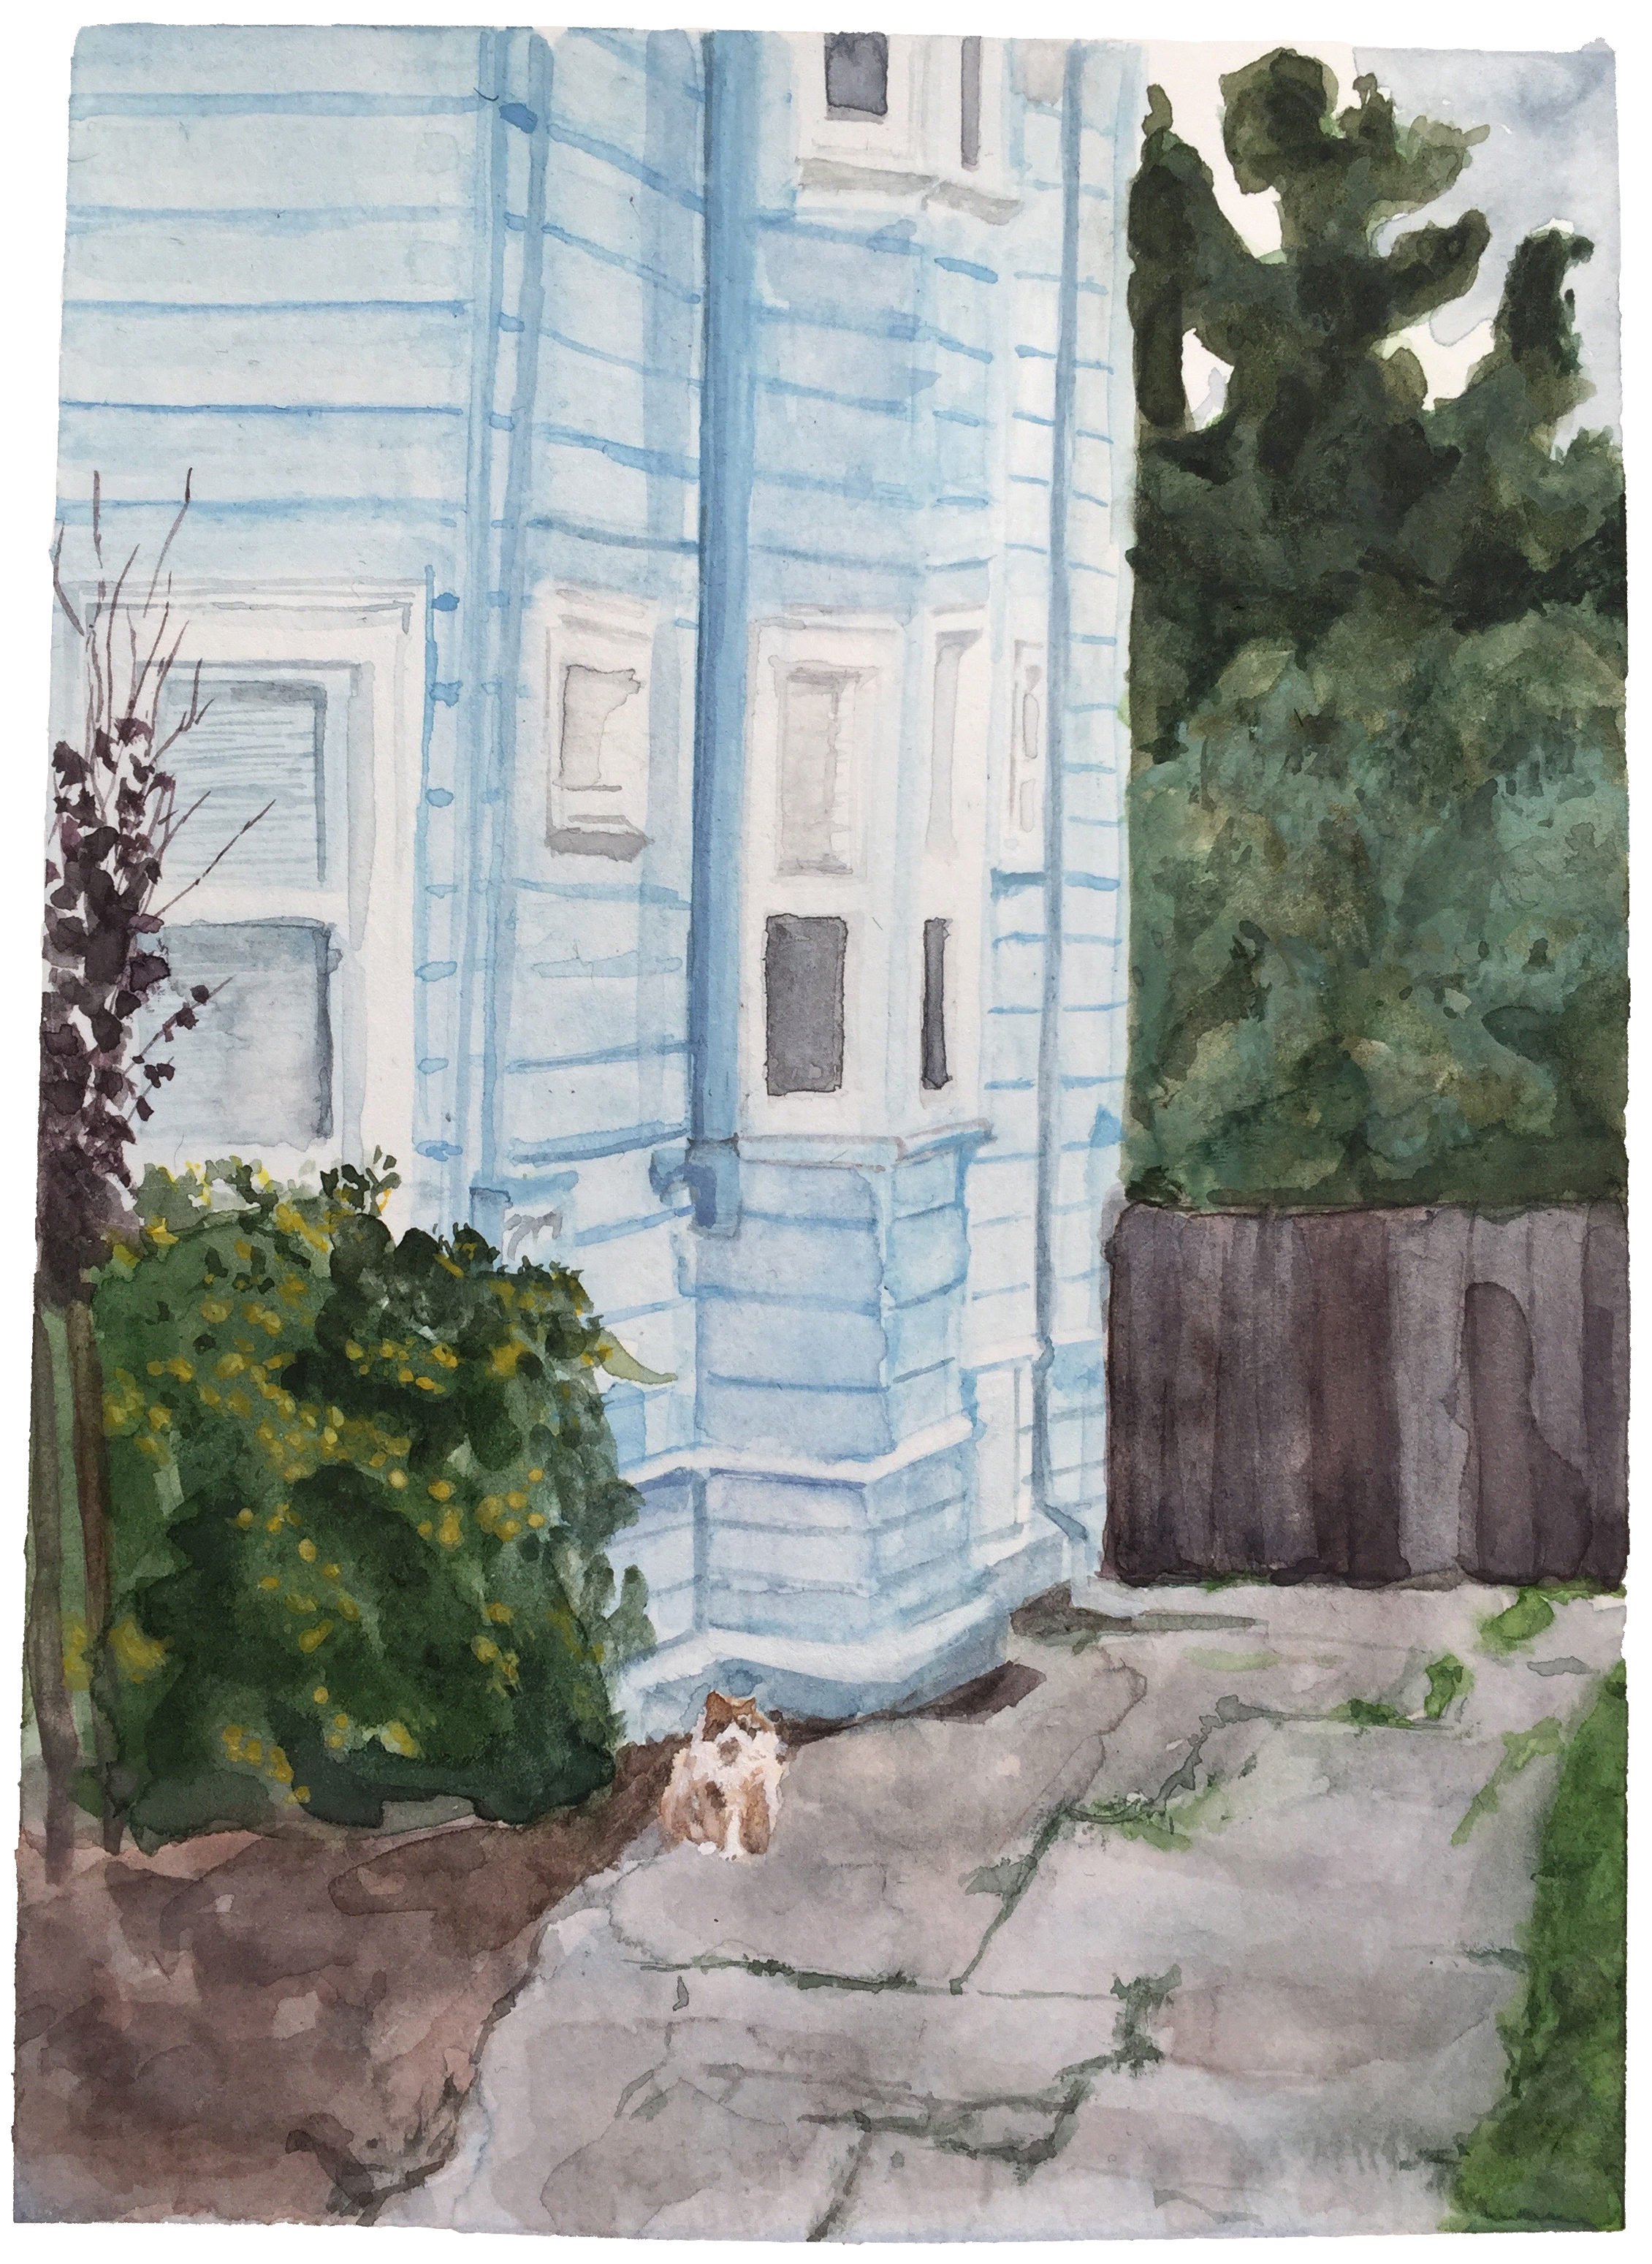 Cat in Driveway 1 (Blue House)